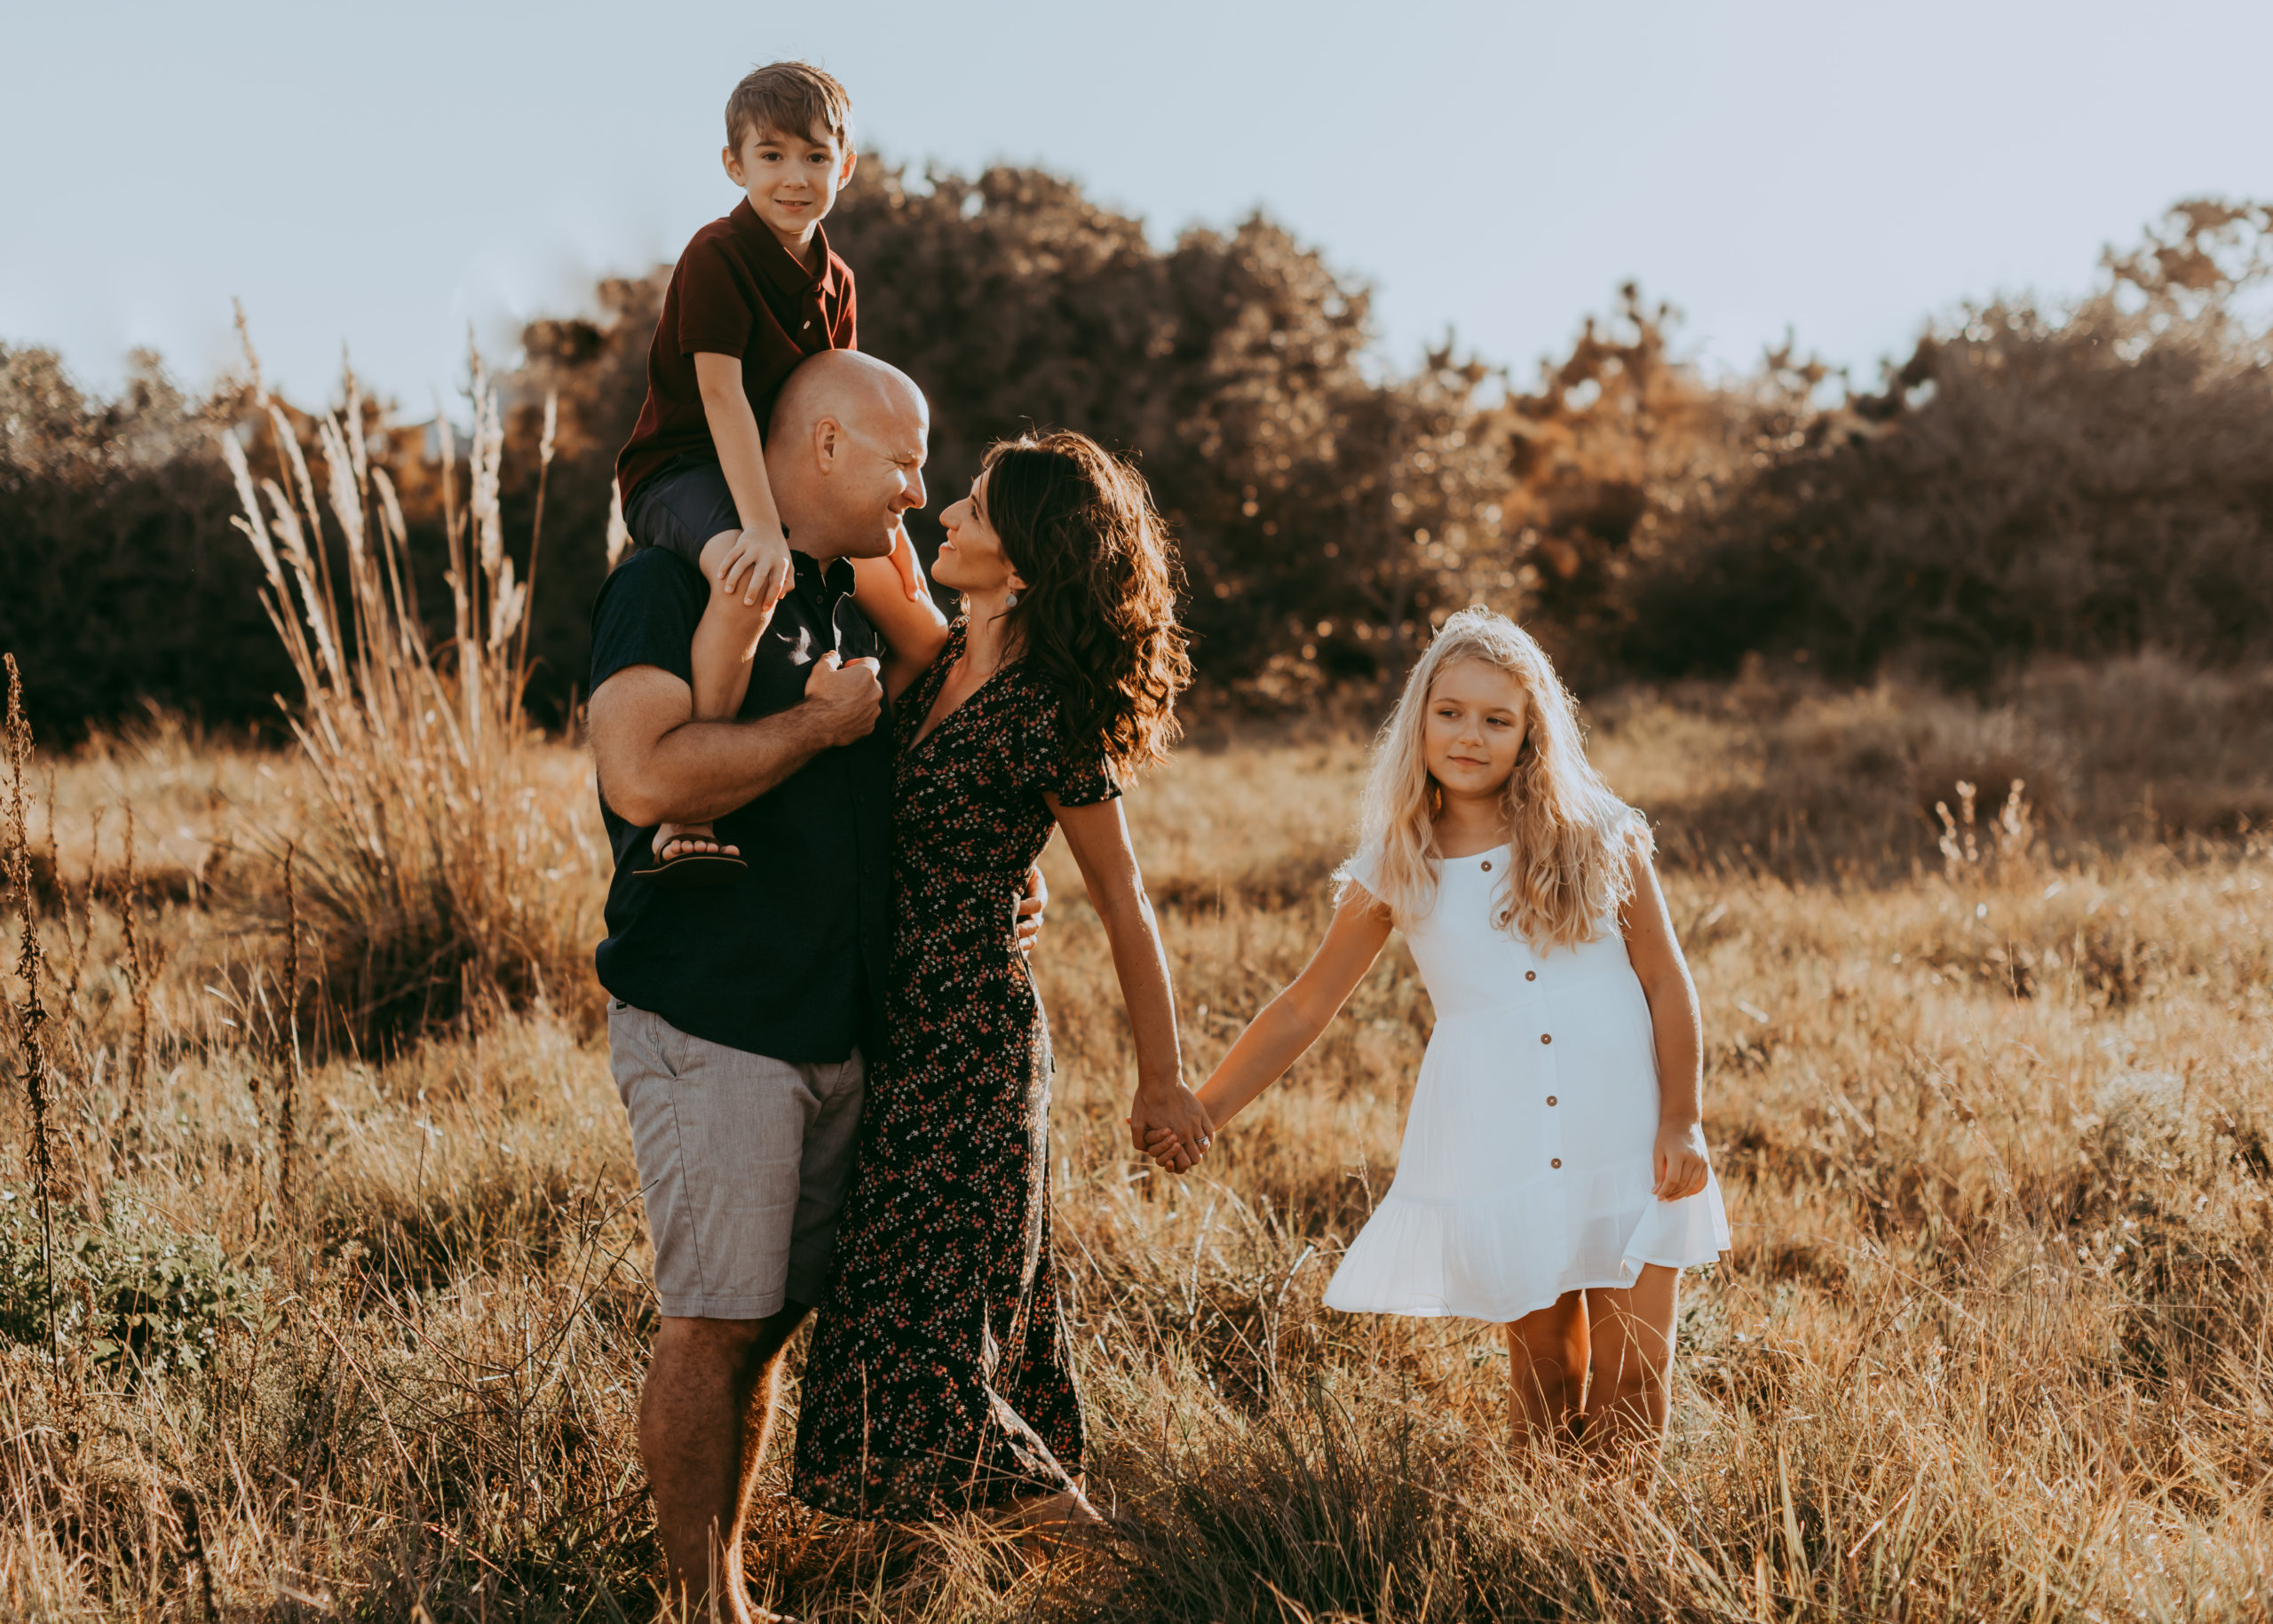 Family Photo Sessions in Corolla by Laura Walter Photography